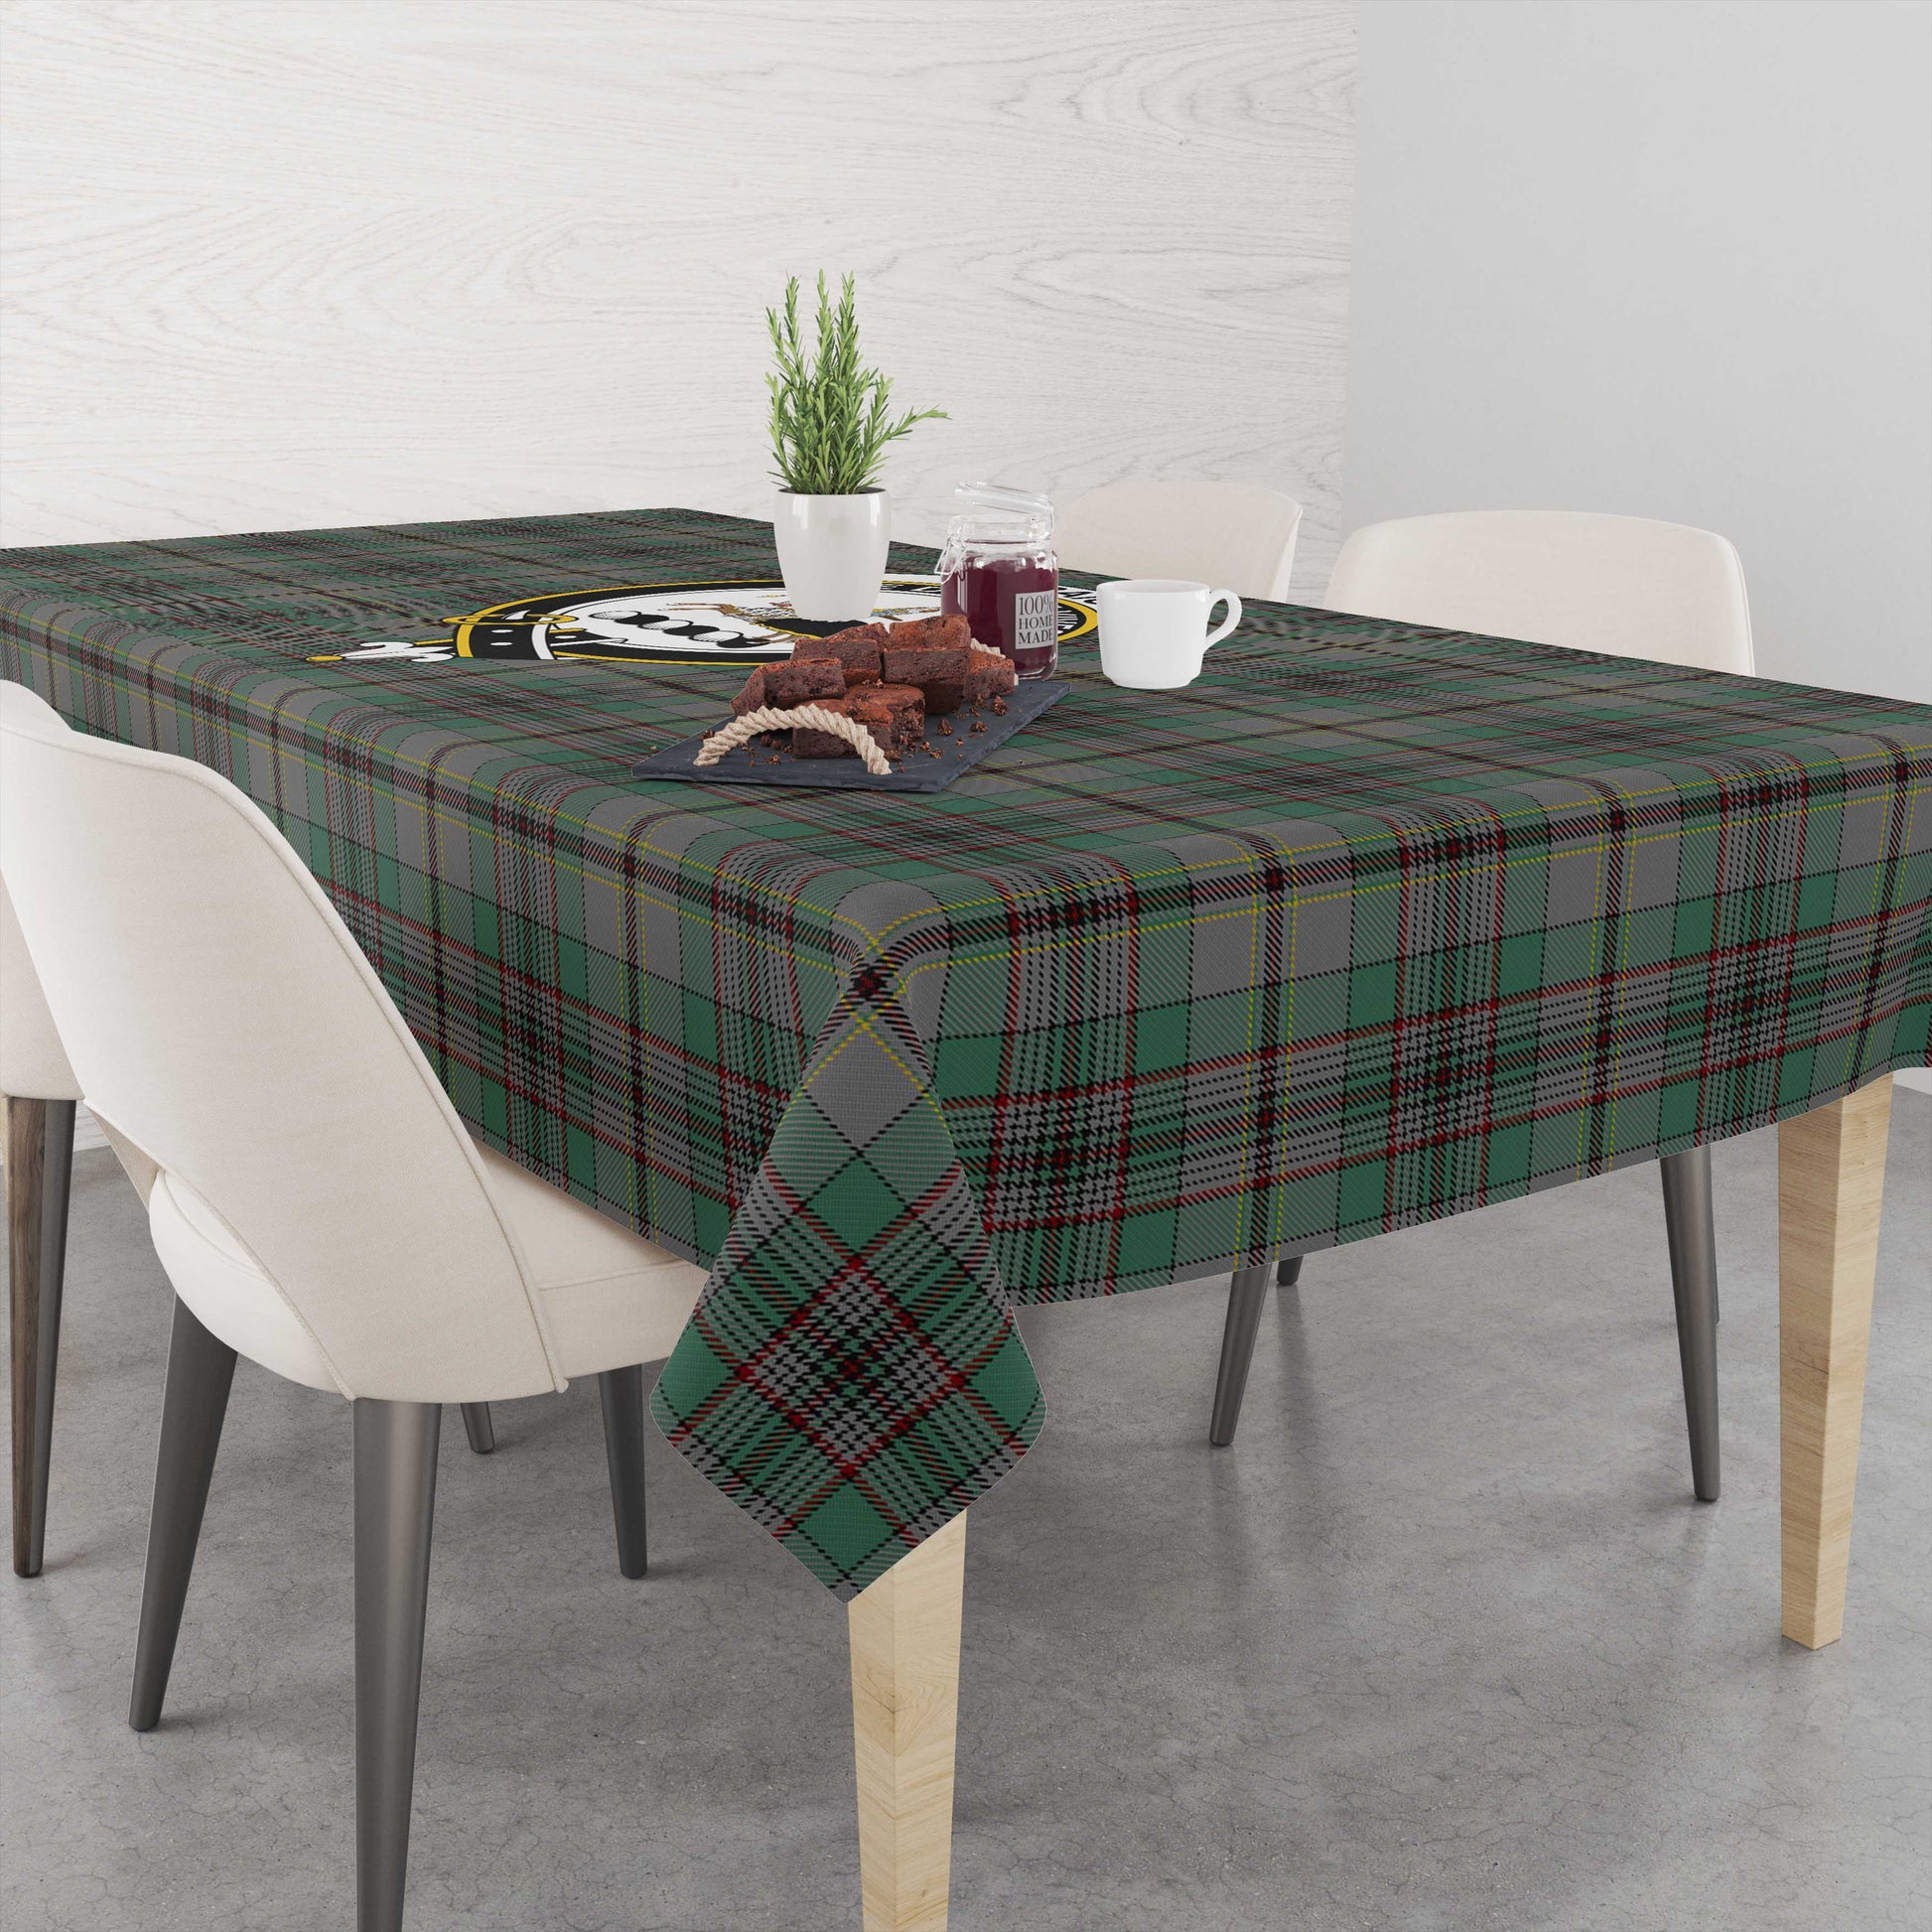 craig-tatan-tablecloth-with-family-crest